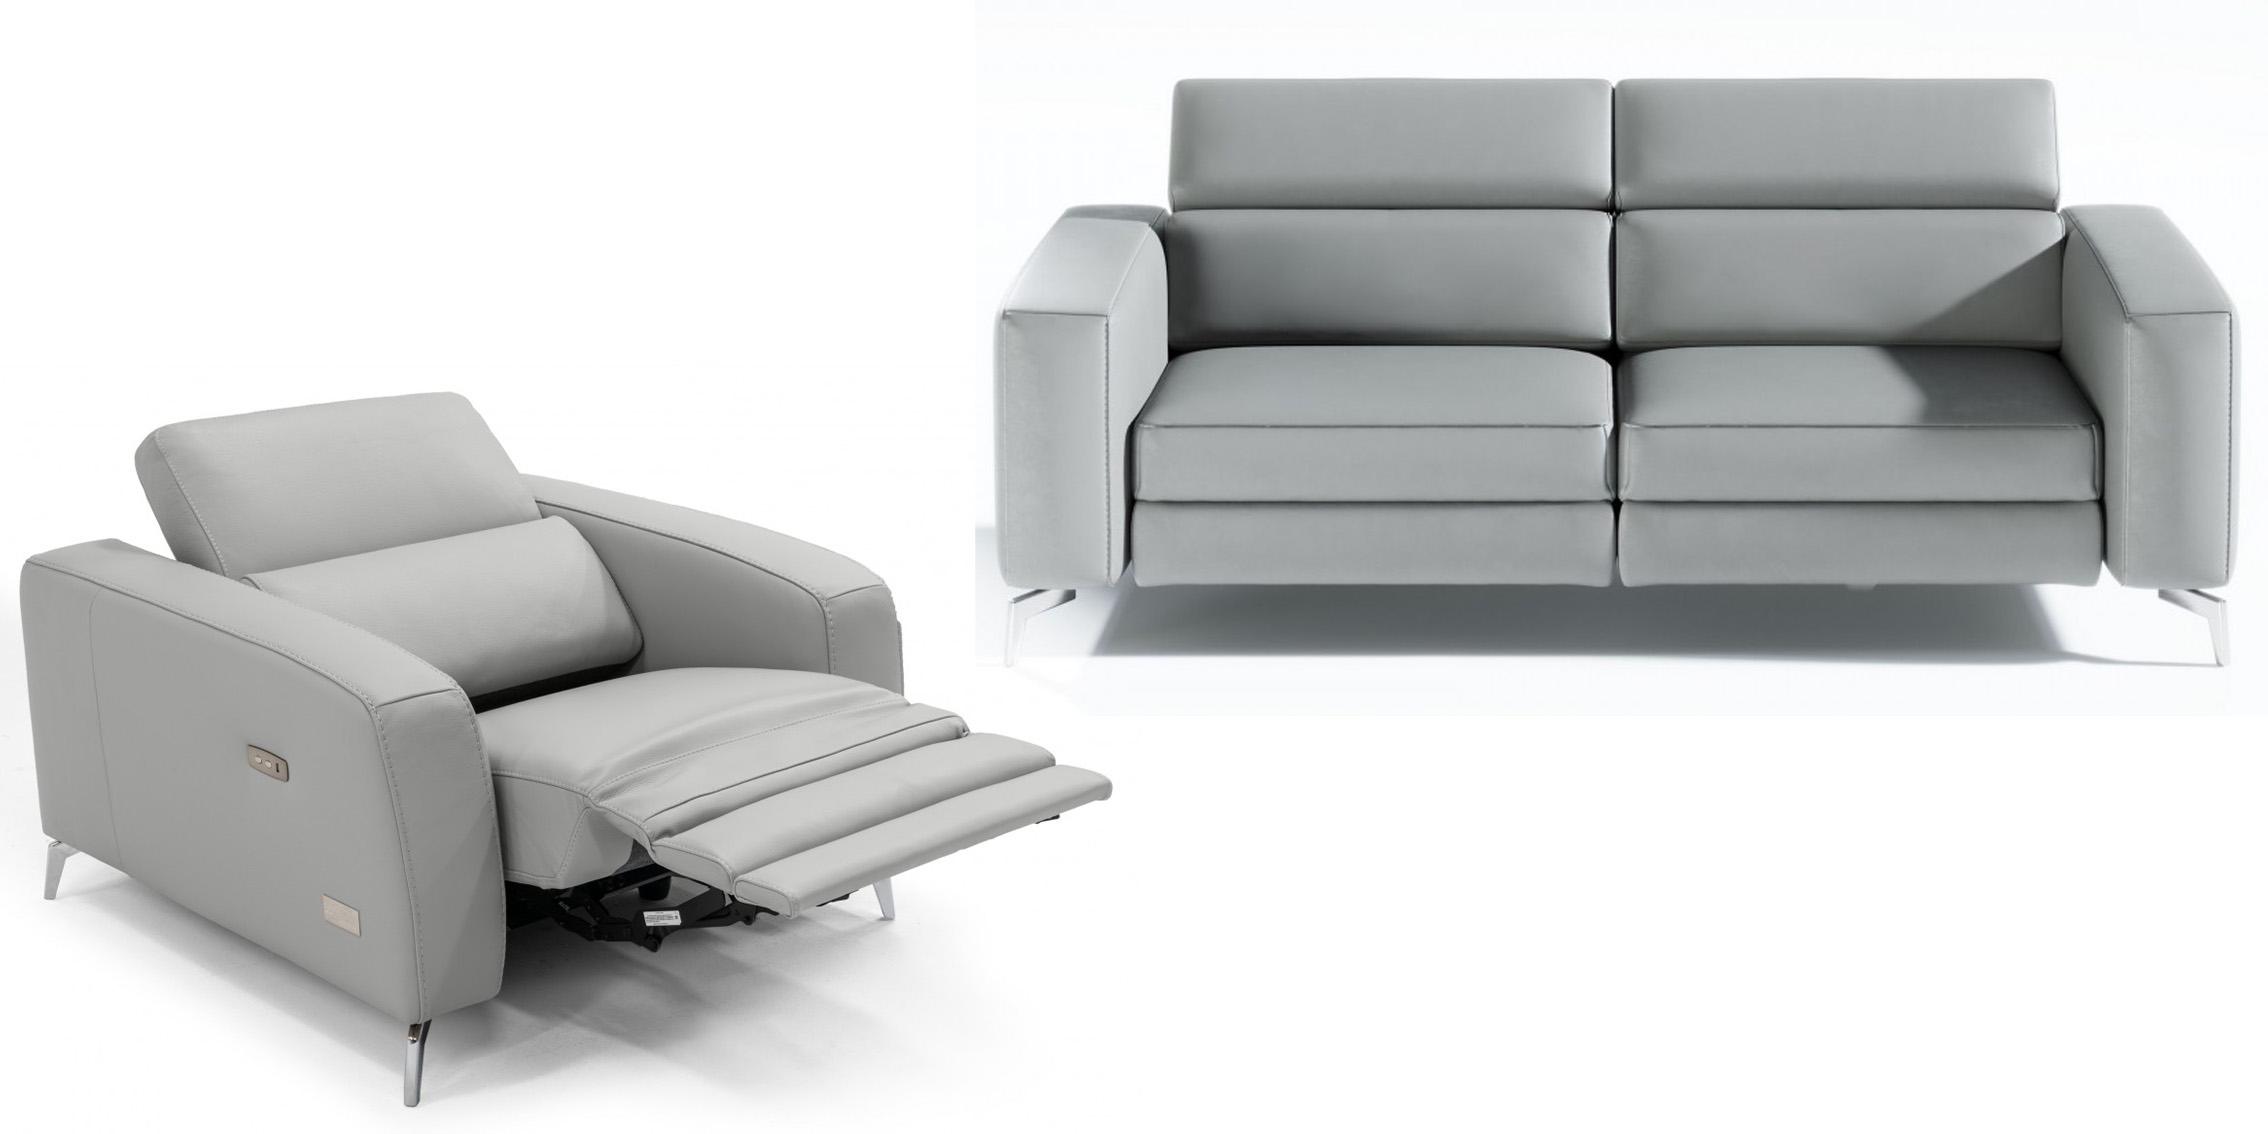 Contemporary, Modern Recliner Sofa Set VGCCROMA-SF-CER-GRY-S VGCCROMA-SF-CER-GRY-S-Set-2 in Gray Italian Leather